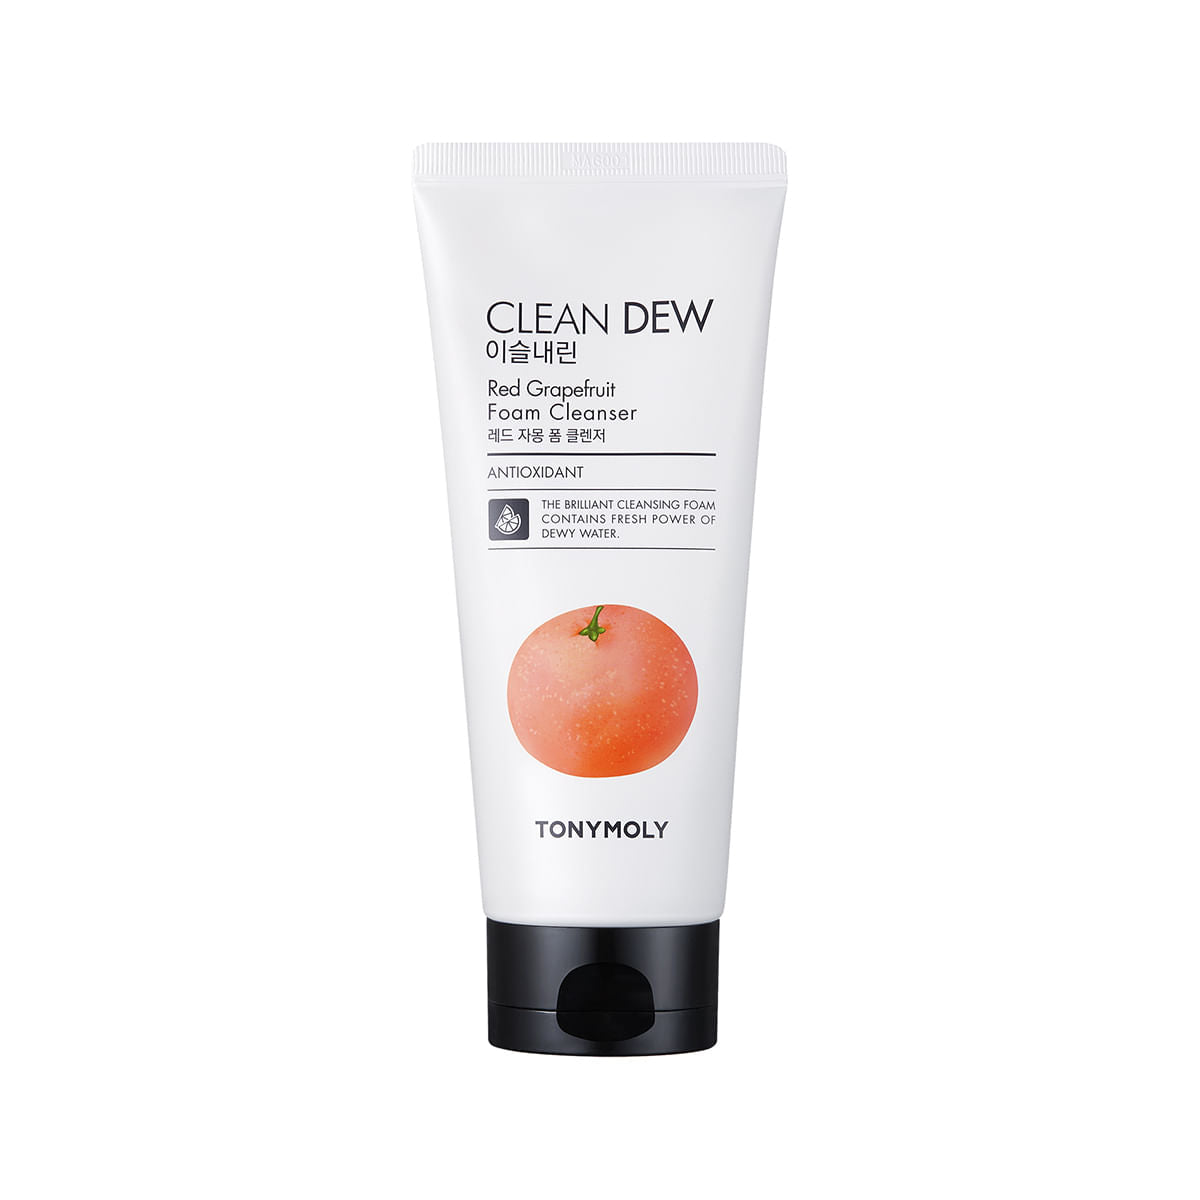 Tony Moly Clean Dew Red Grapefruit Foam Cleanser